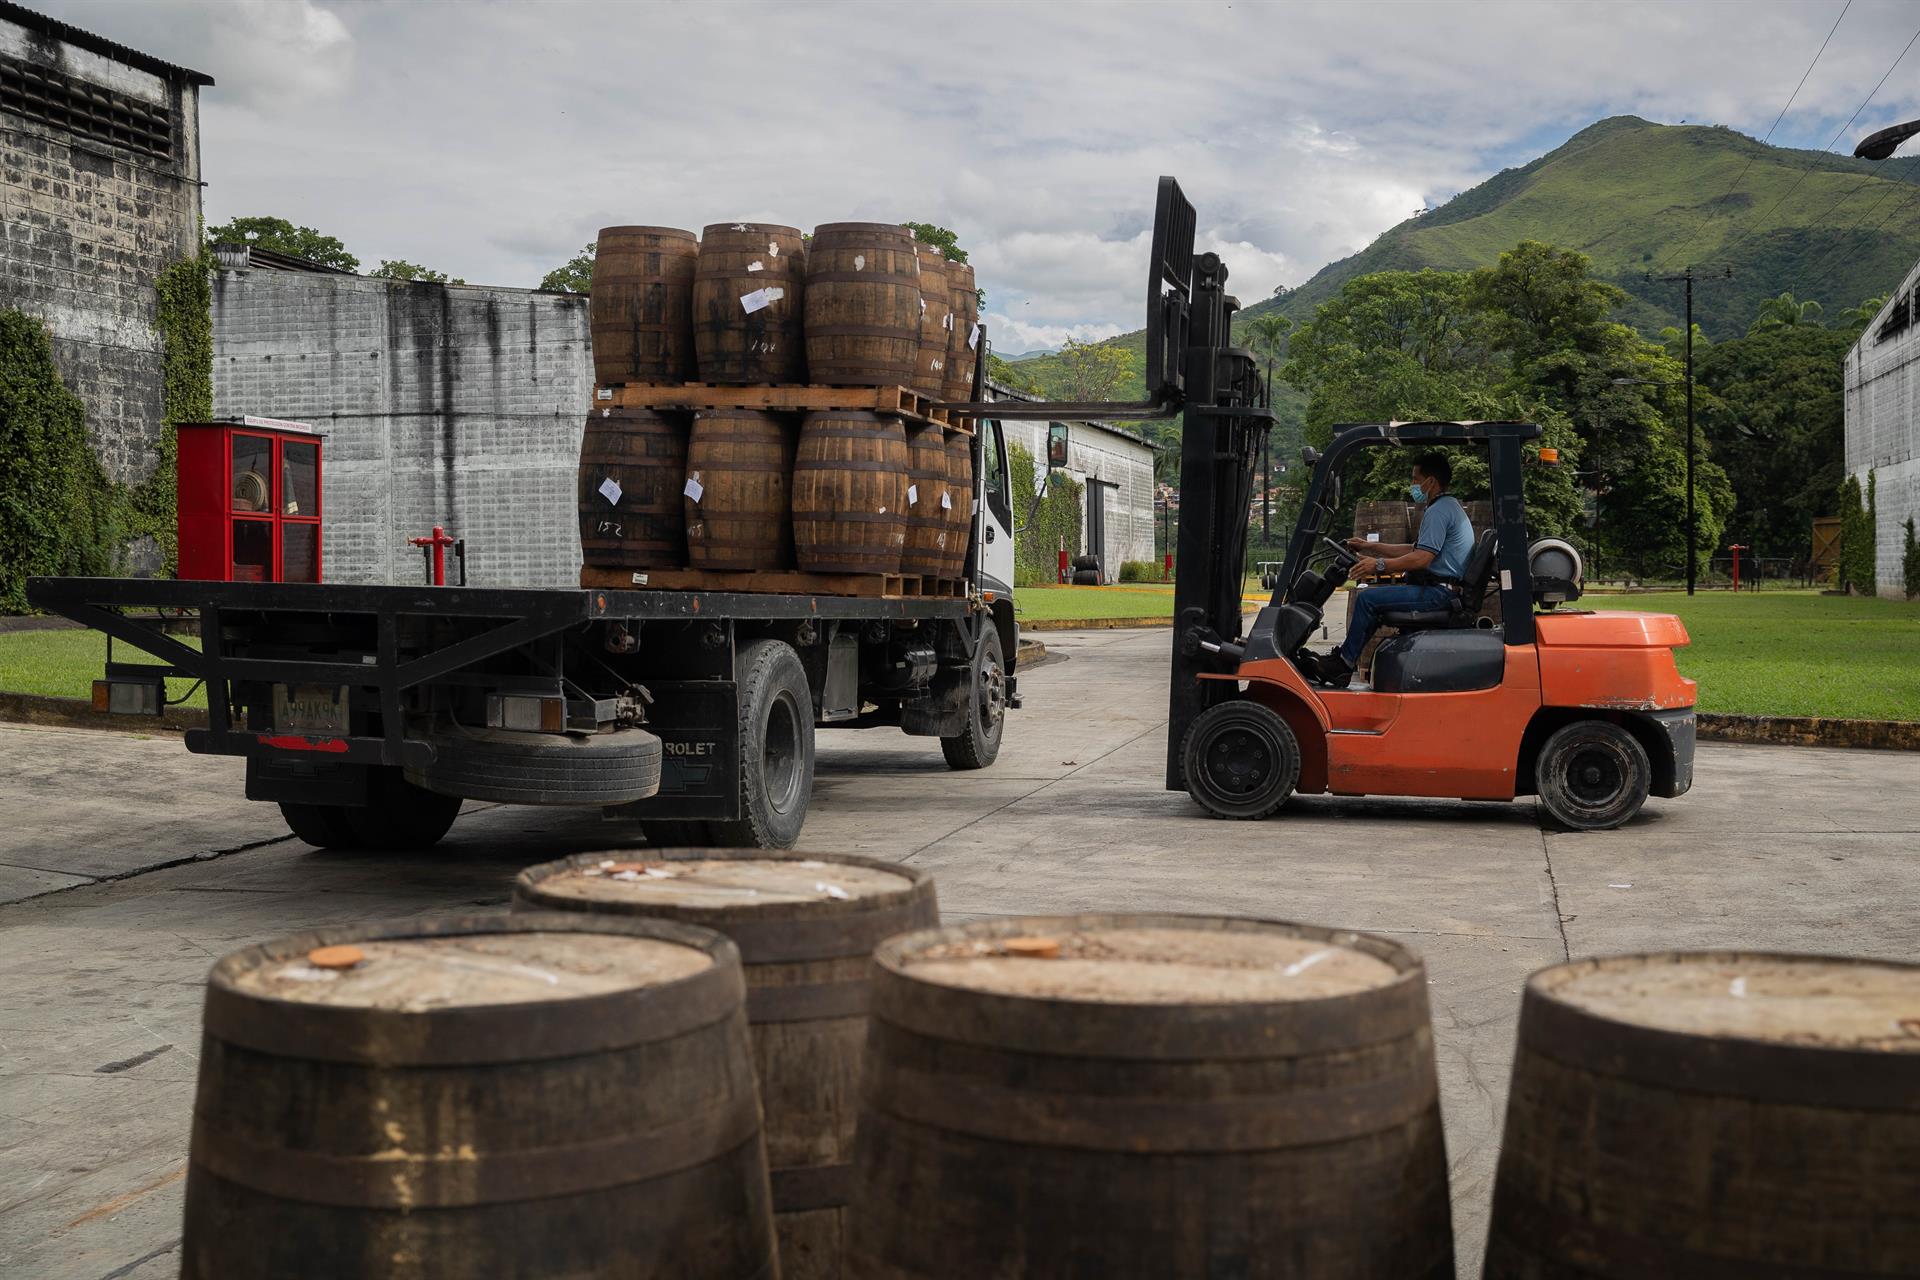 The smuggling of spare parts, cigarettes and liquor hits Venezuela’s national production hard